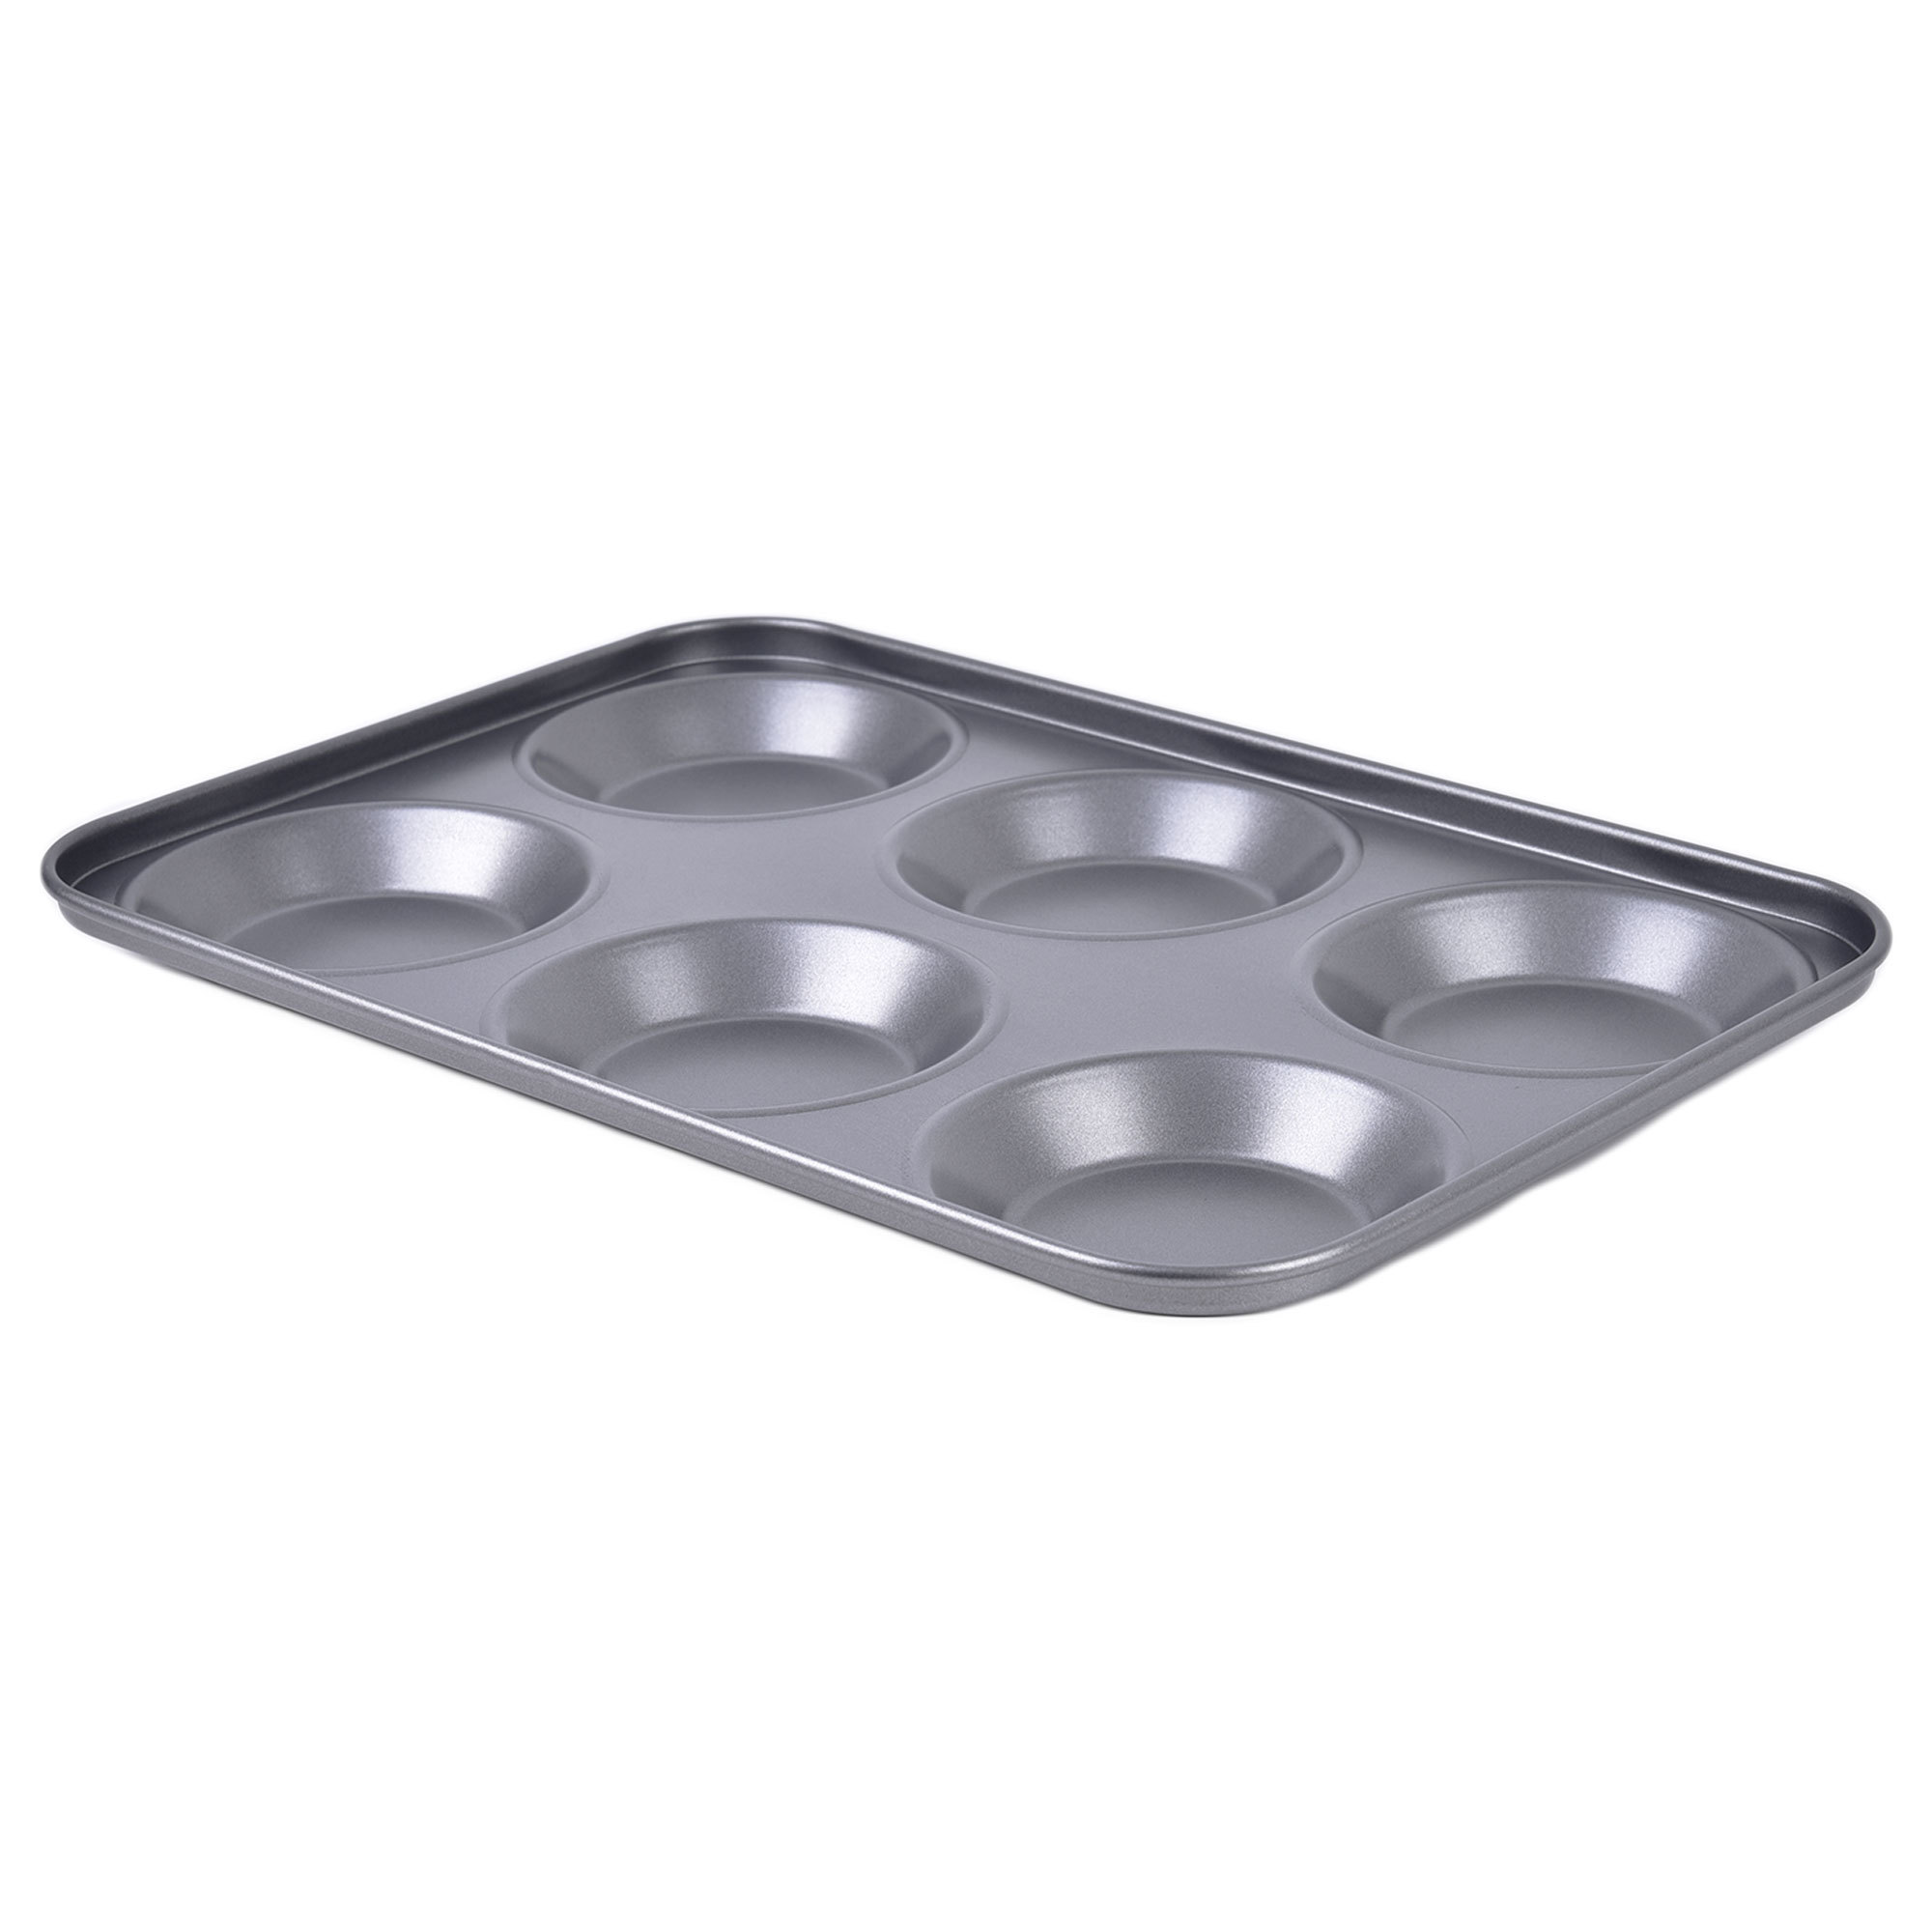 6Cup Yorkshire Pudding Pan 3231-21